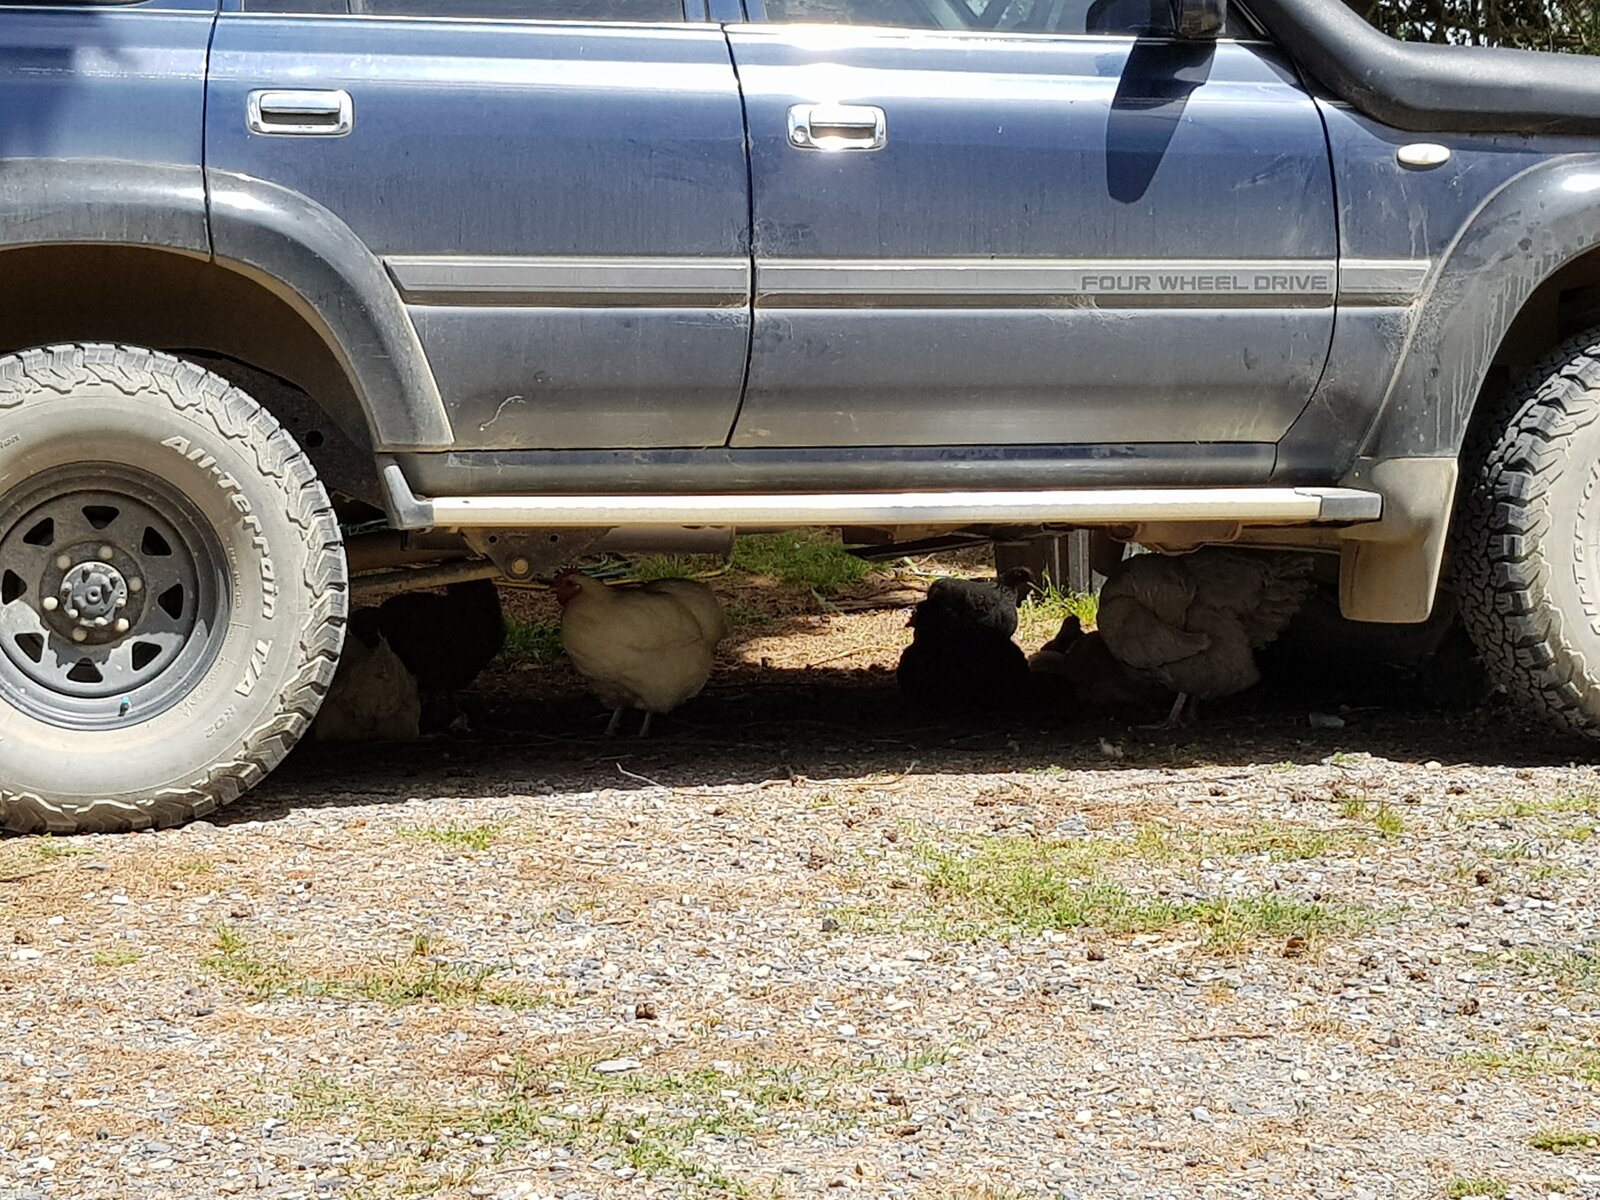 4x4's are for chooks to shelter under, right?